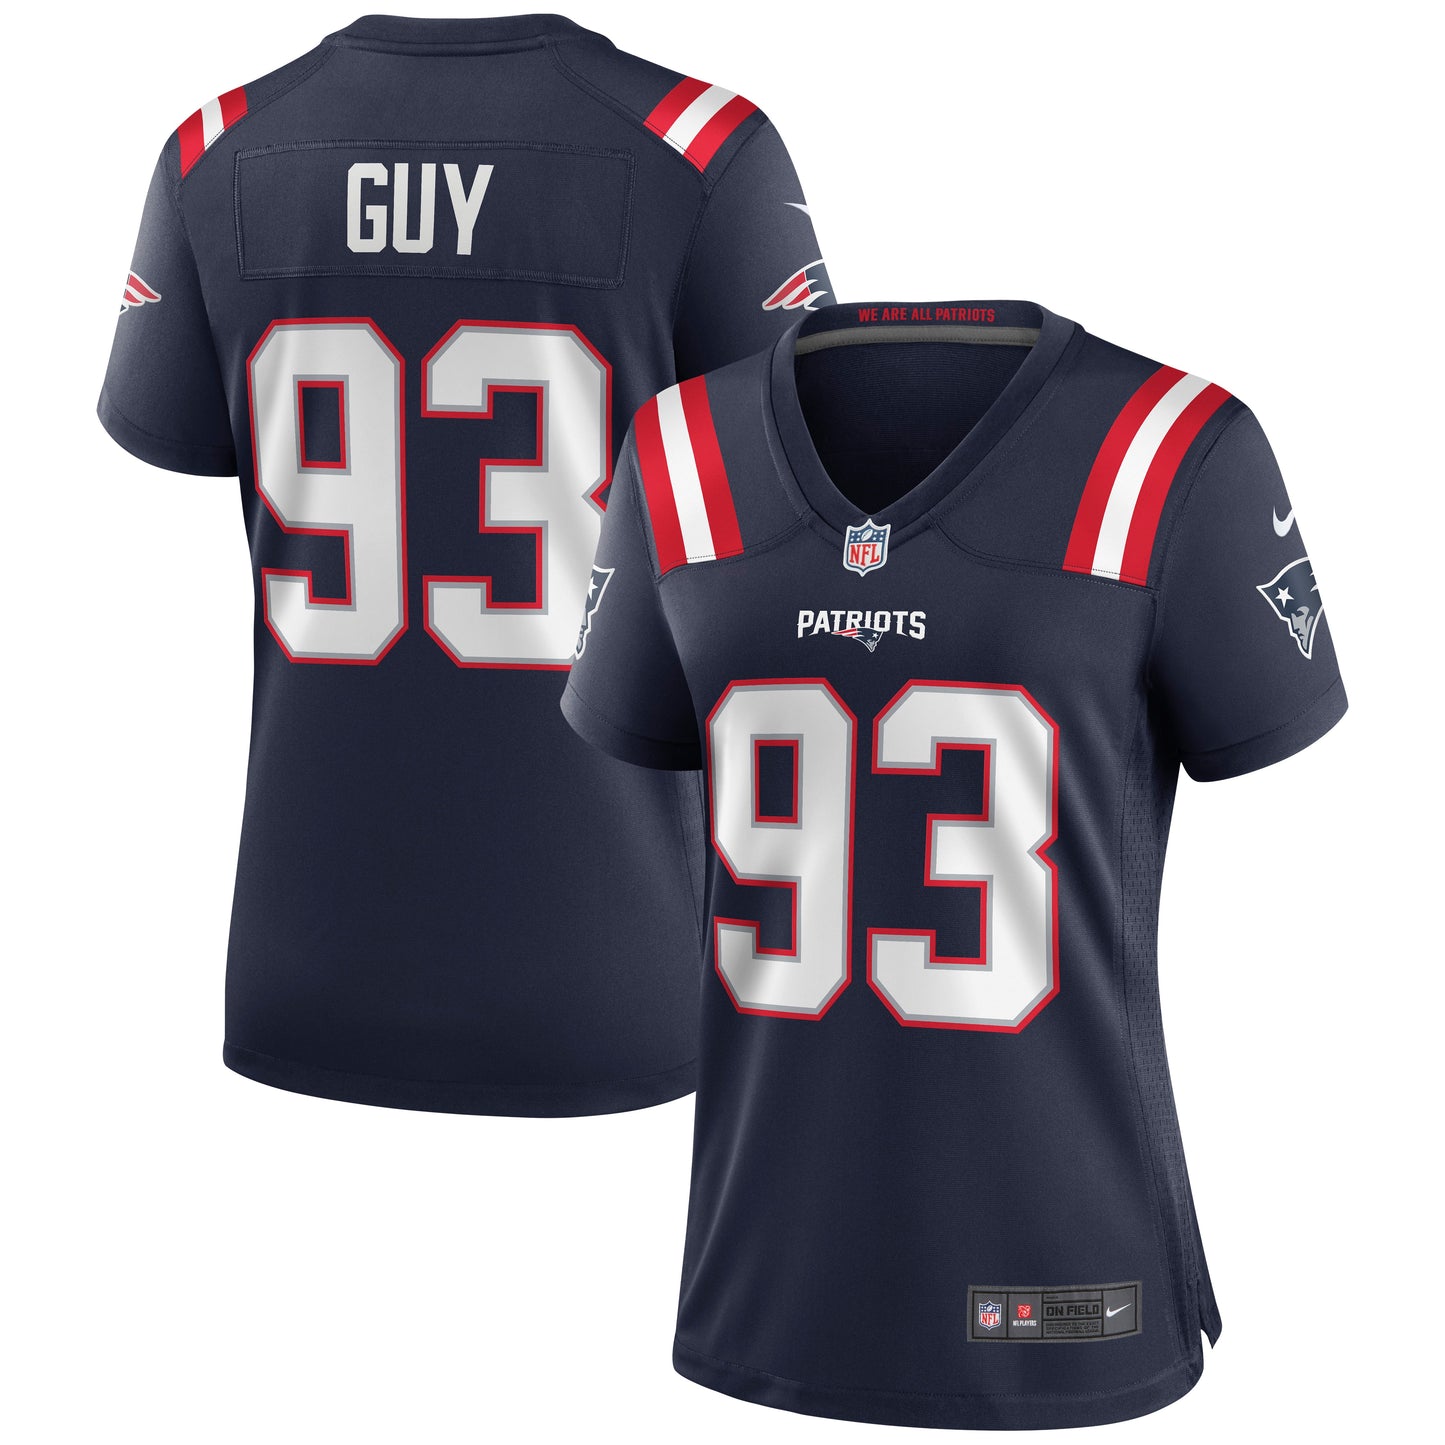 Lawrence Guy New England Patriots Nike Women's Game Jersey - Navy